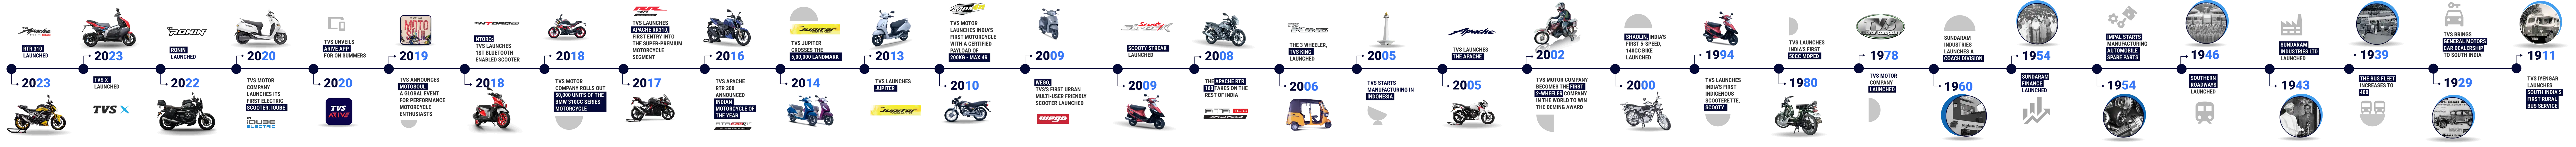 TVS Motor Company Timeline from 1911 to 2023